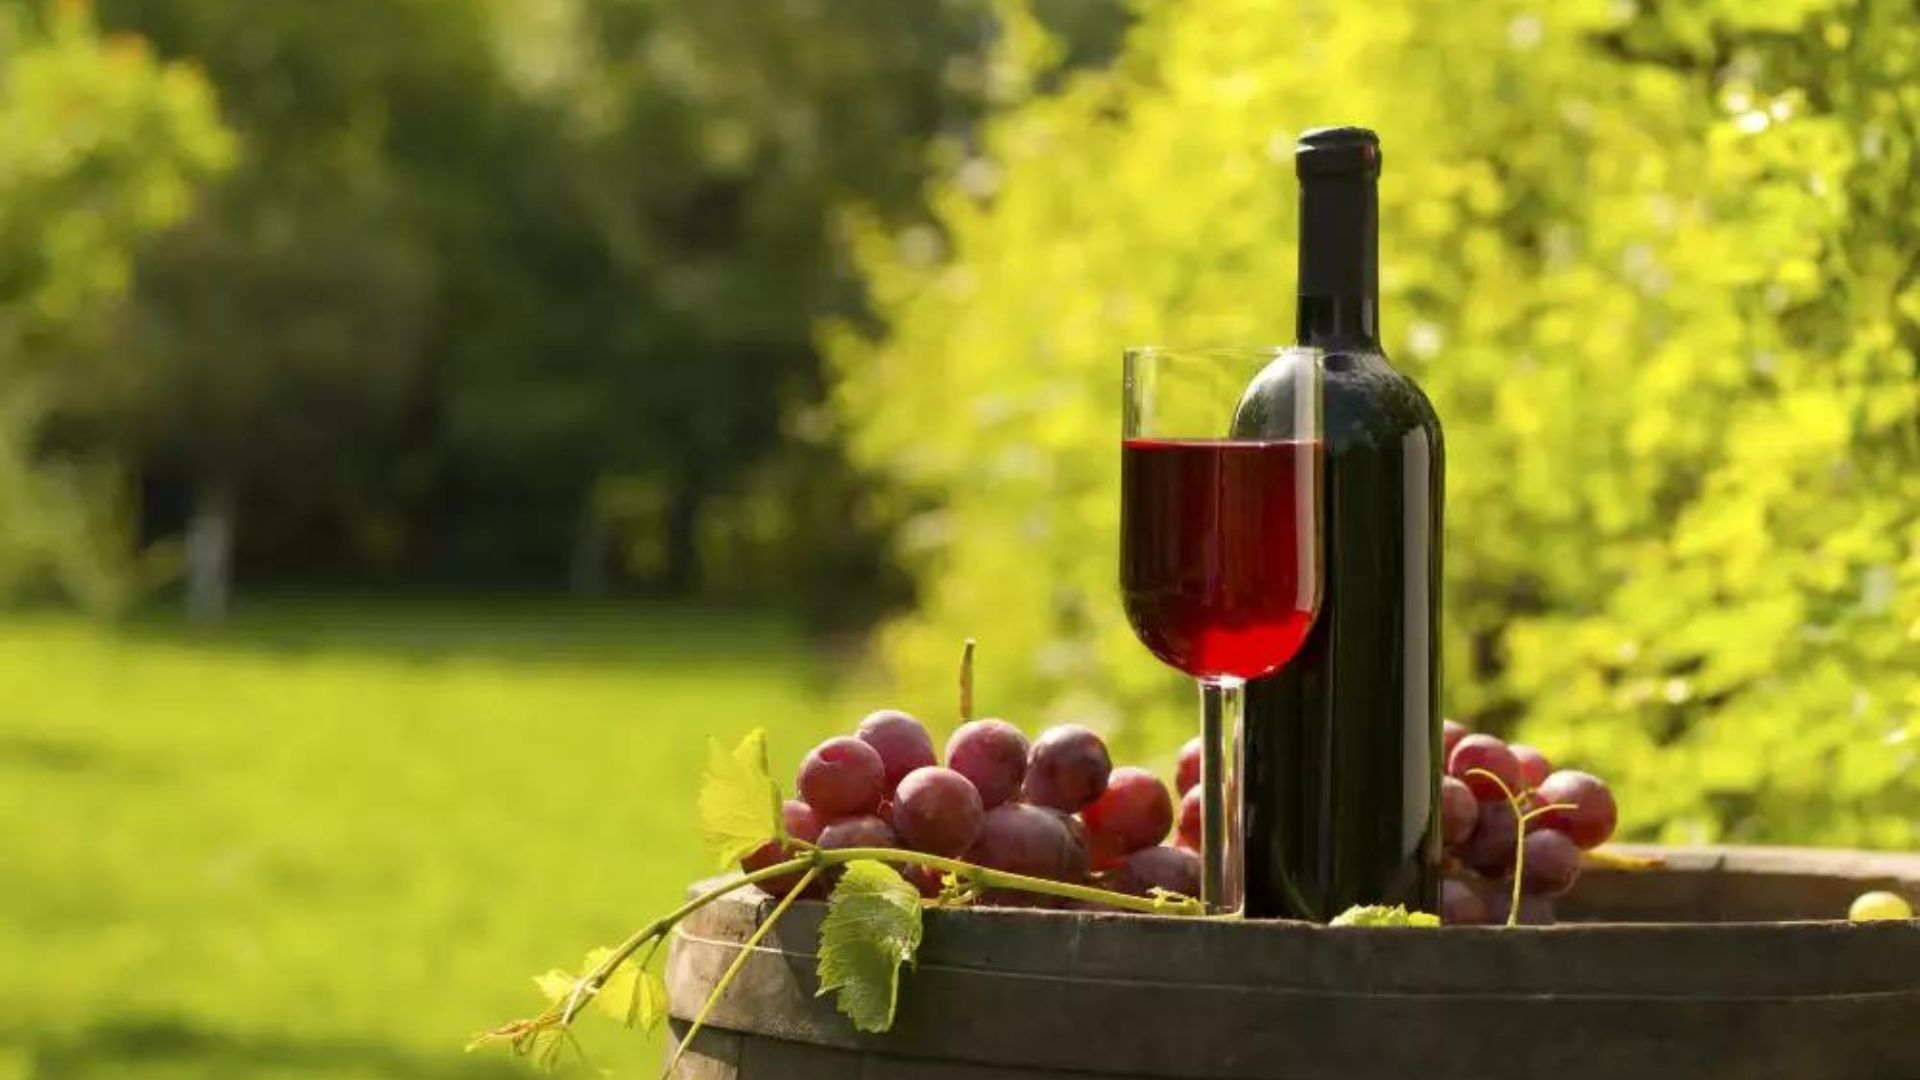 A bottle of wine, a glass with wine and grapes on a bucket showing sustainability in winemaking